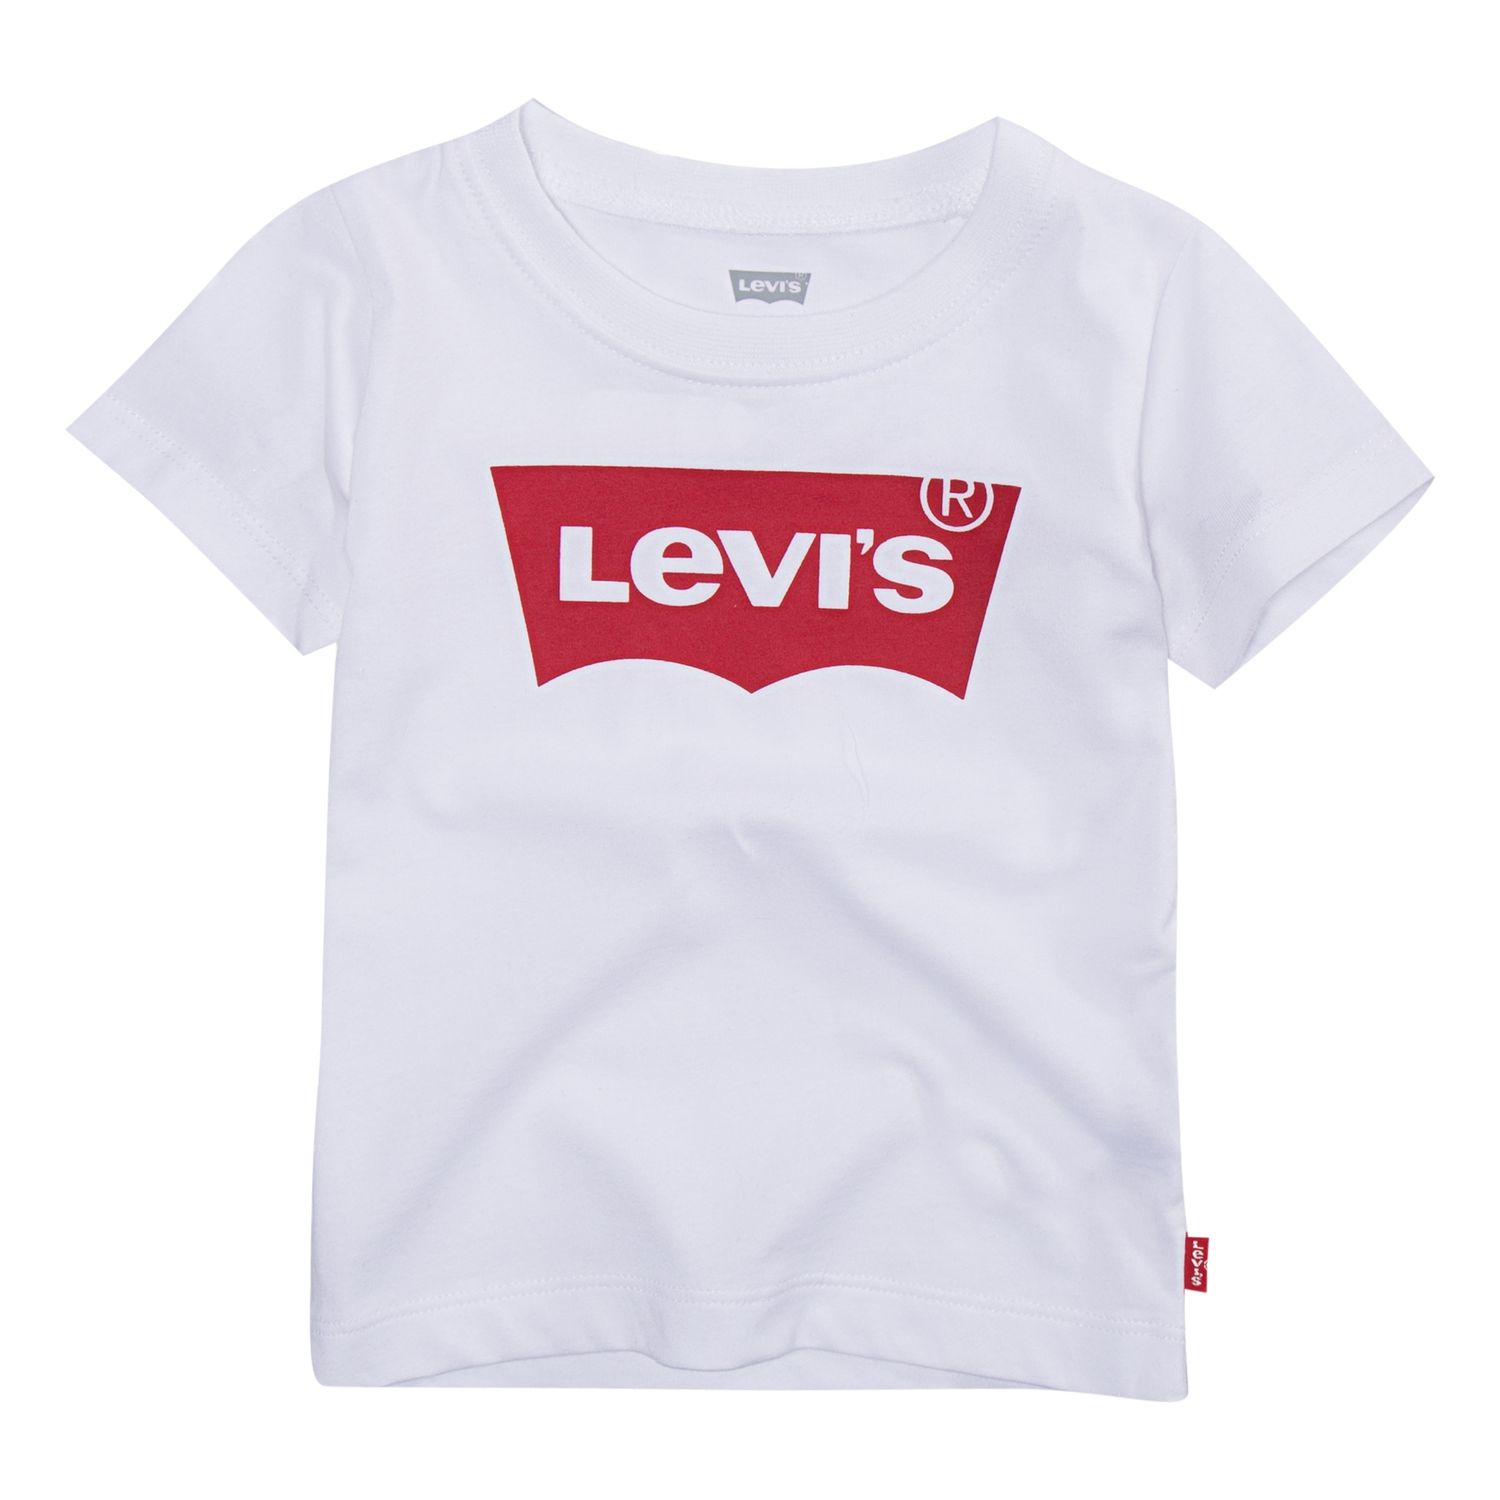 Levi's T Shirts: Find Solid, Patterned 